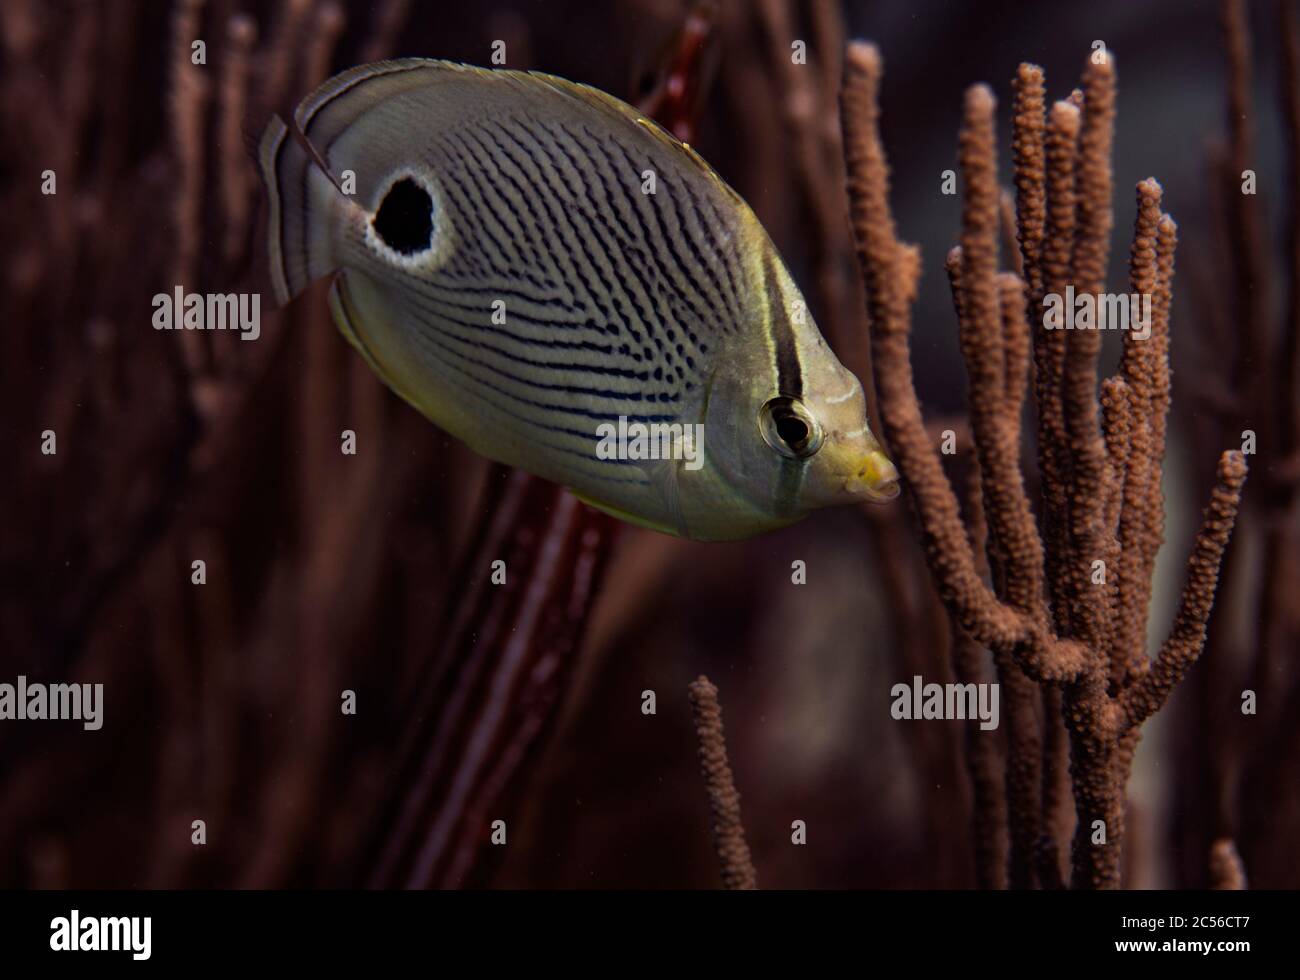 A foureye butterflyfish, Chaetodon capistratus, on the reef in Bonaire, The Netherlands Stock Photo